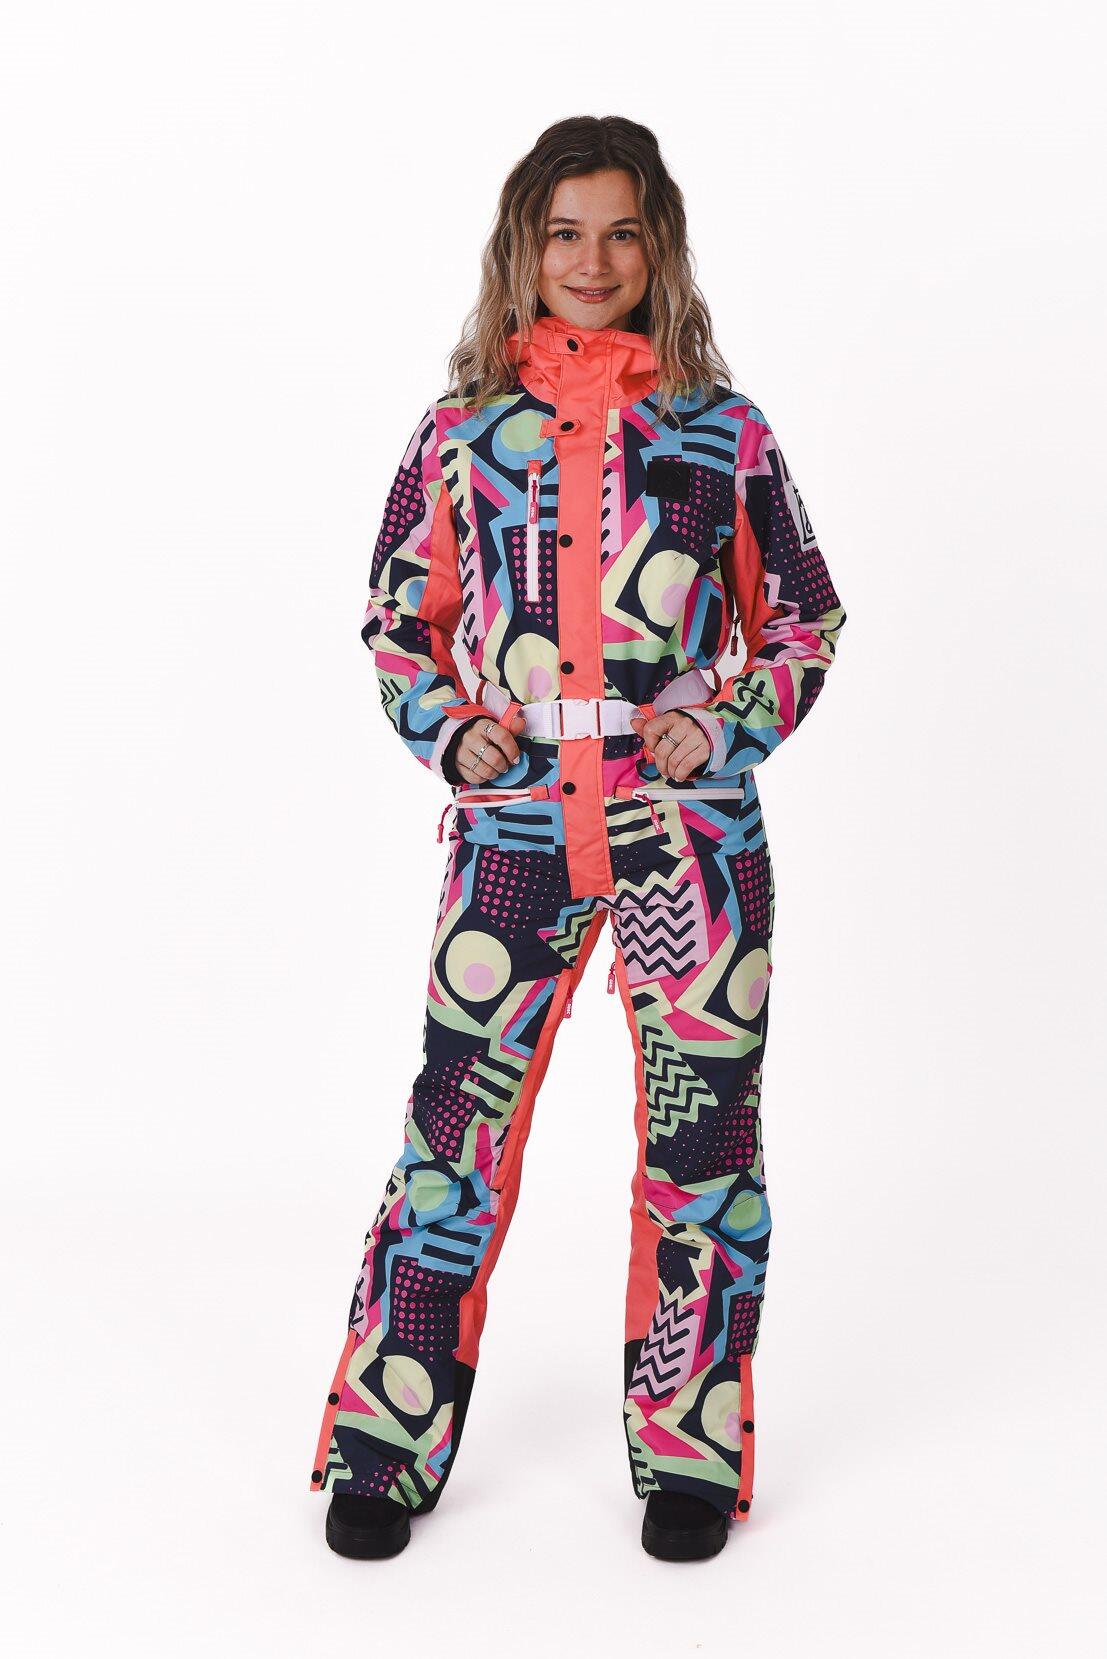 OOSC Saved by The Bell Female Ski Suit